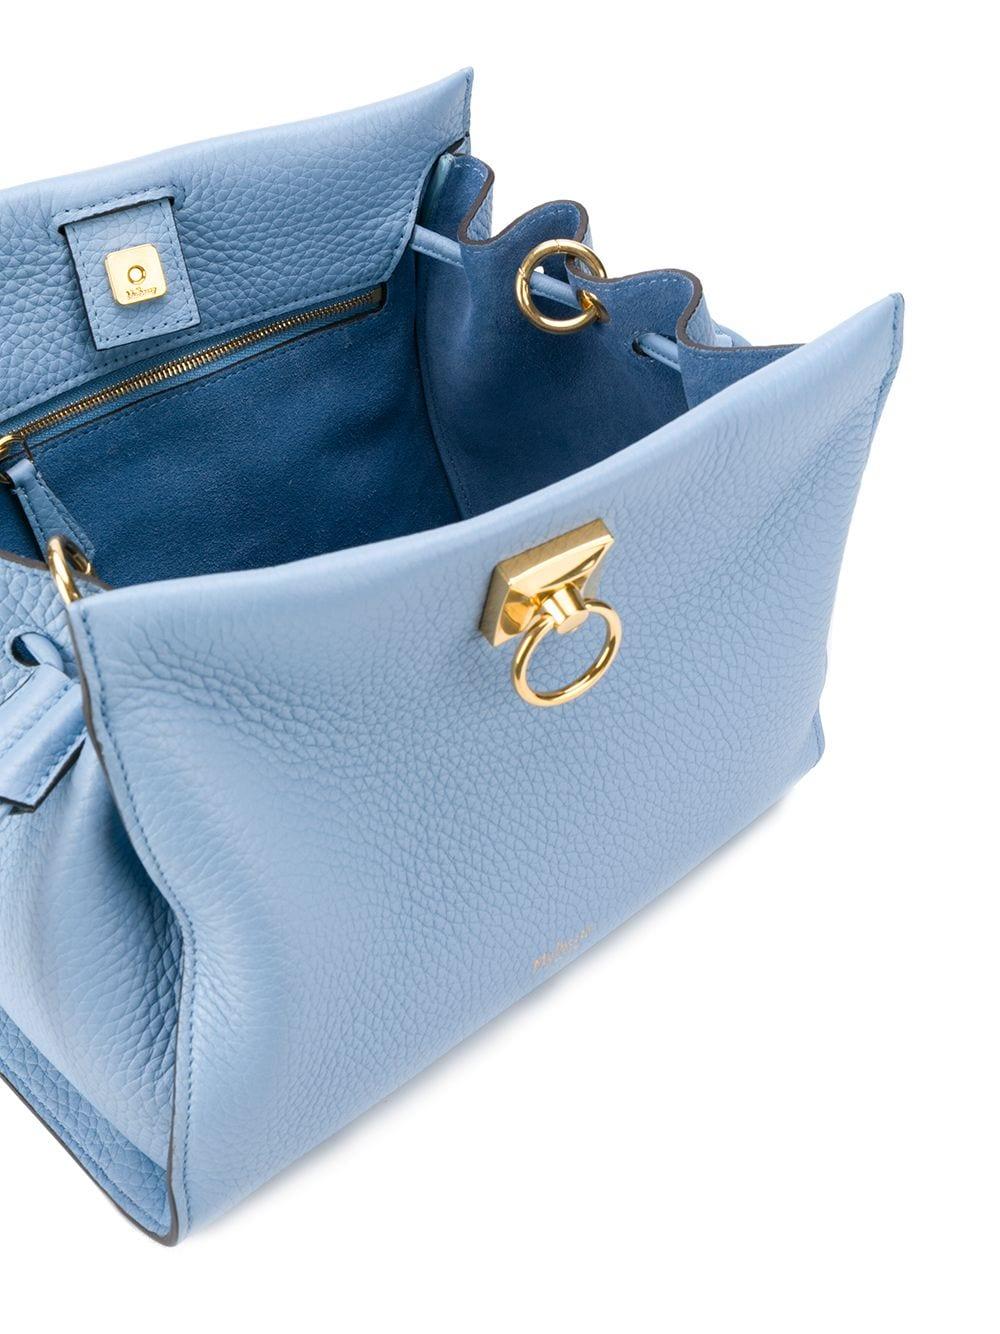 Mulberry Leather Small Iris Heavy Grain Tote Bag in Blue - Lyst